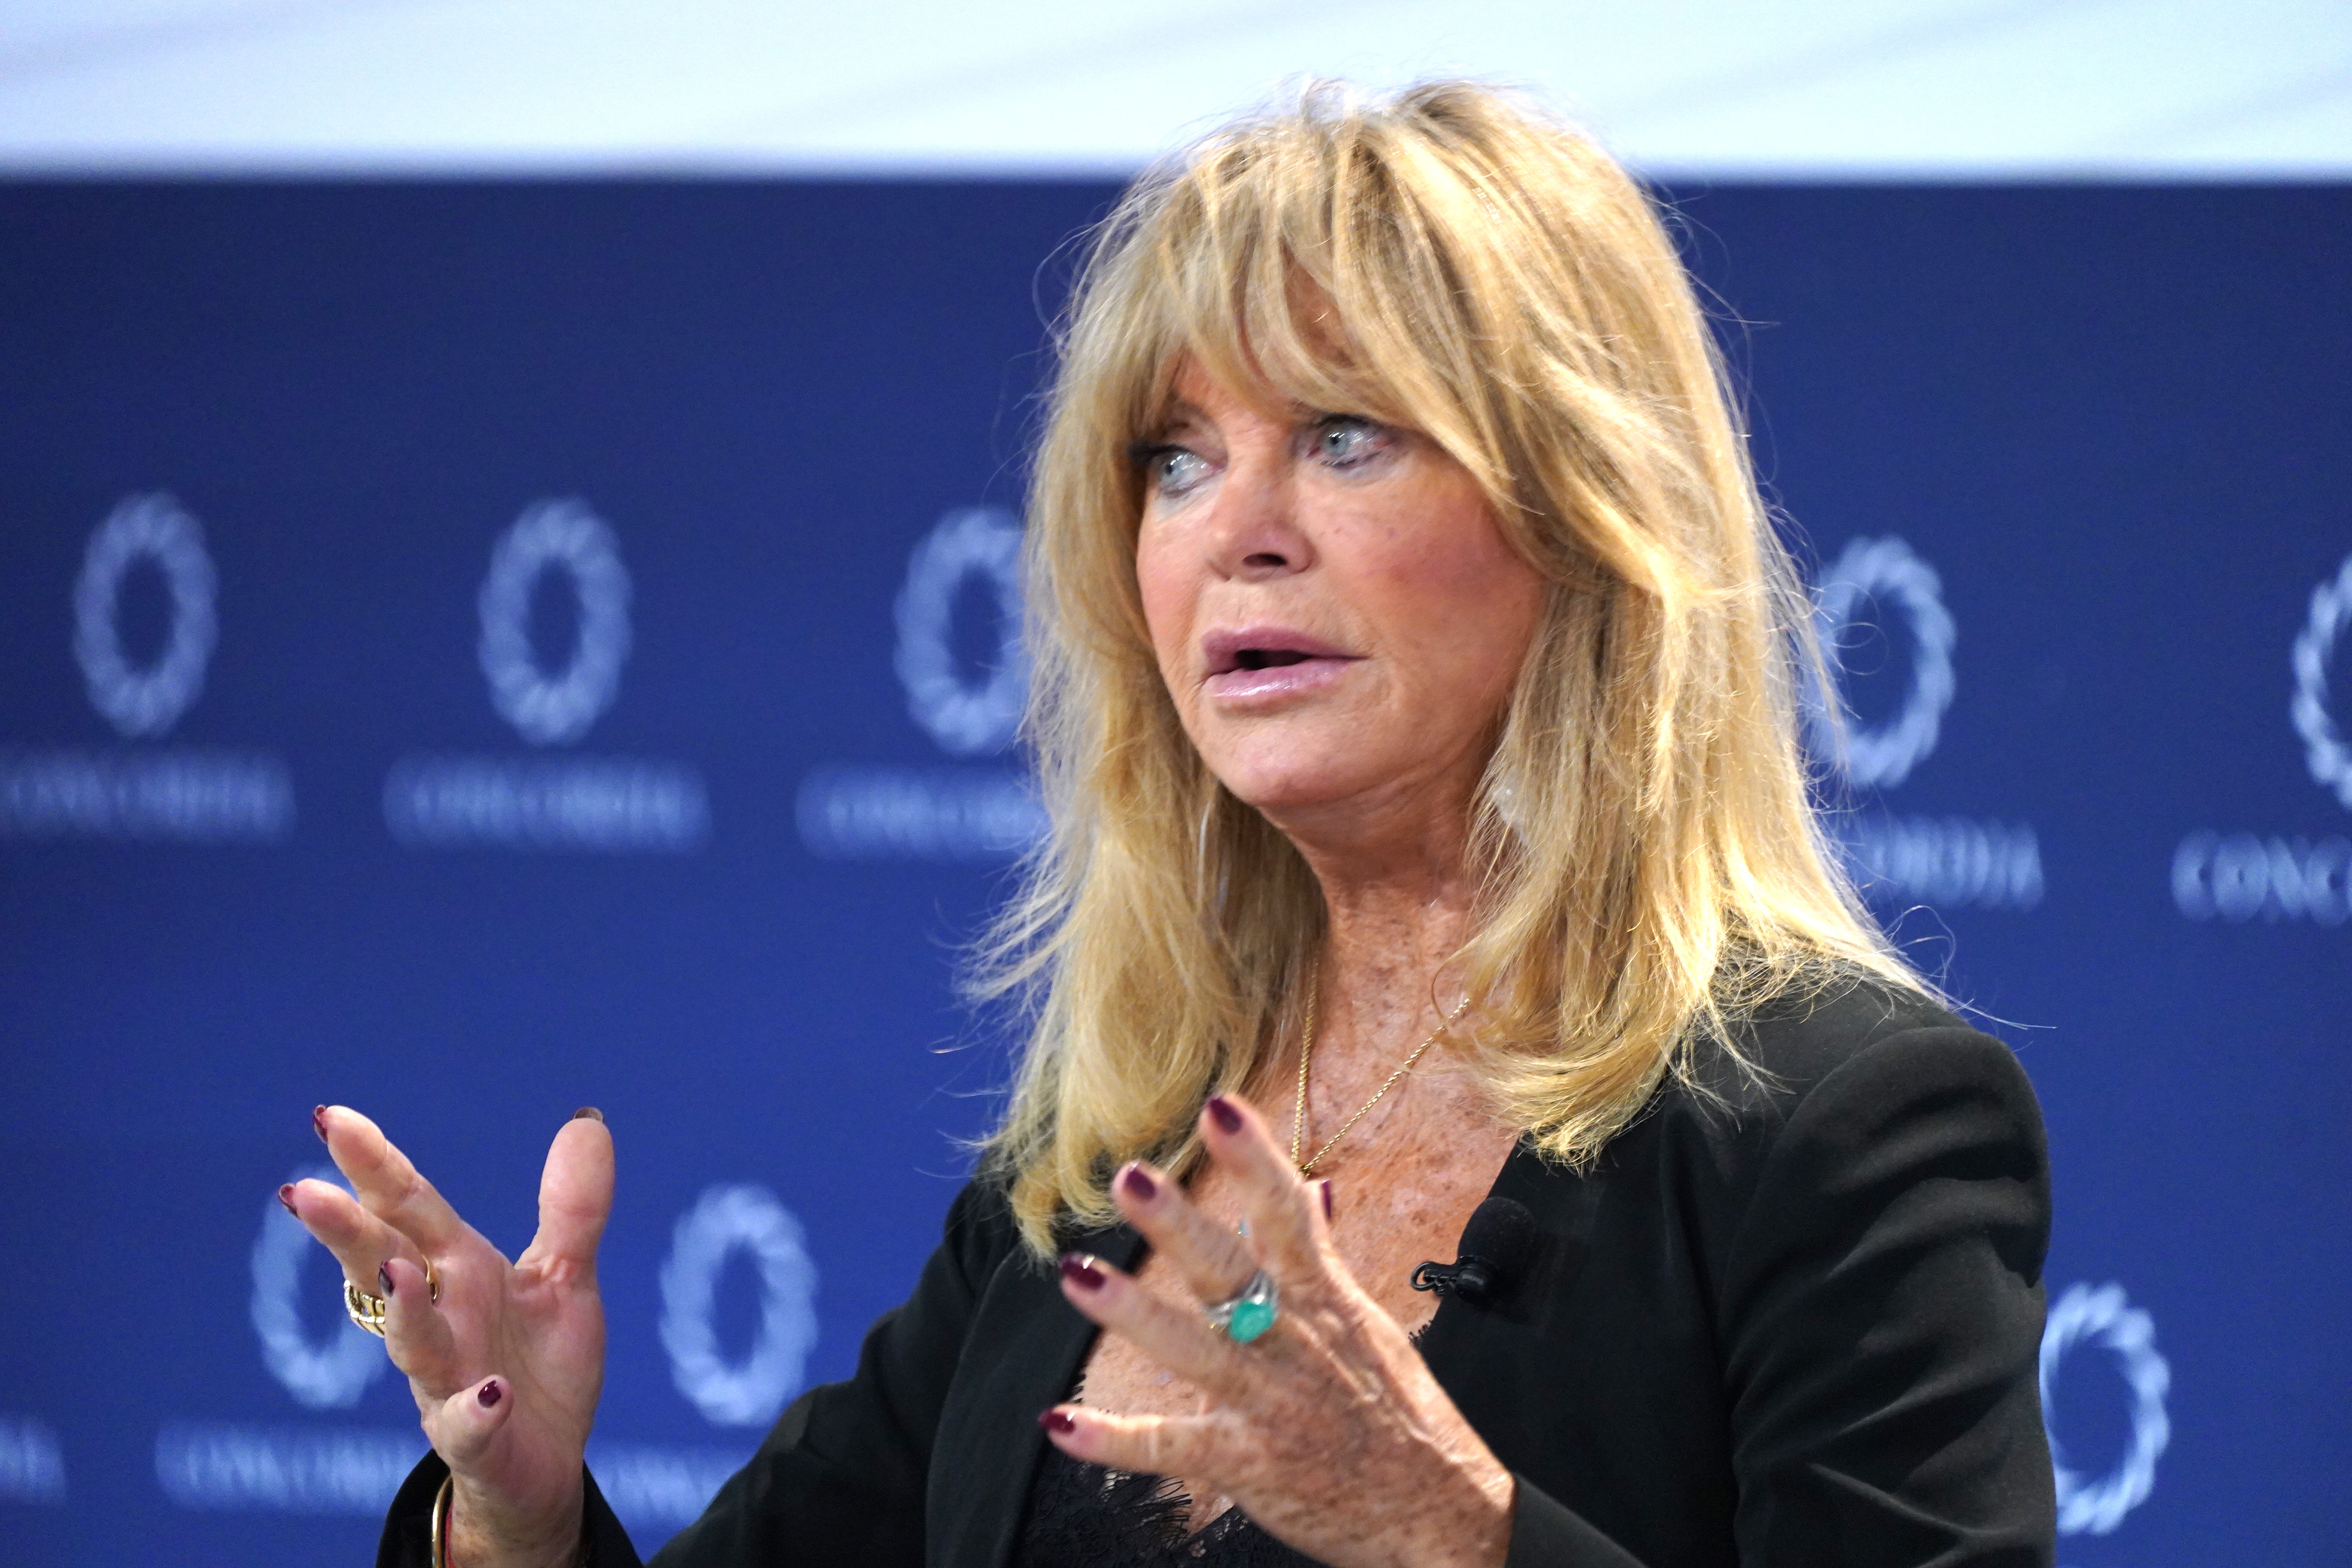 Goldie Hawn speaks on stage during The Concordia Annual Summit - Day 2 in New York City, on September 20, 2022. | Source: Getty Images